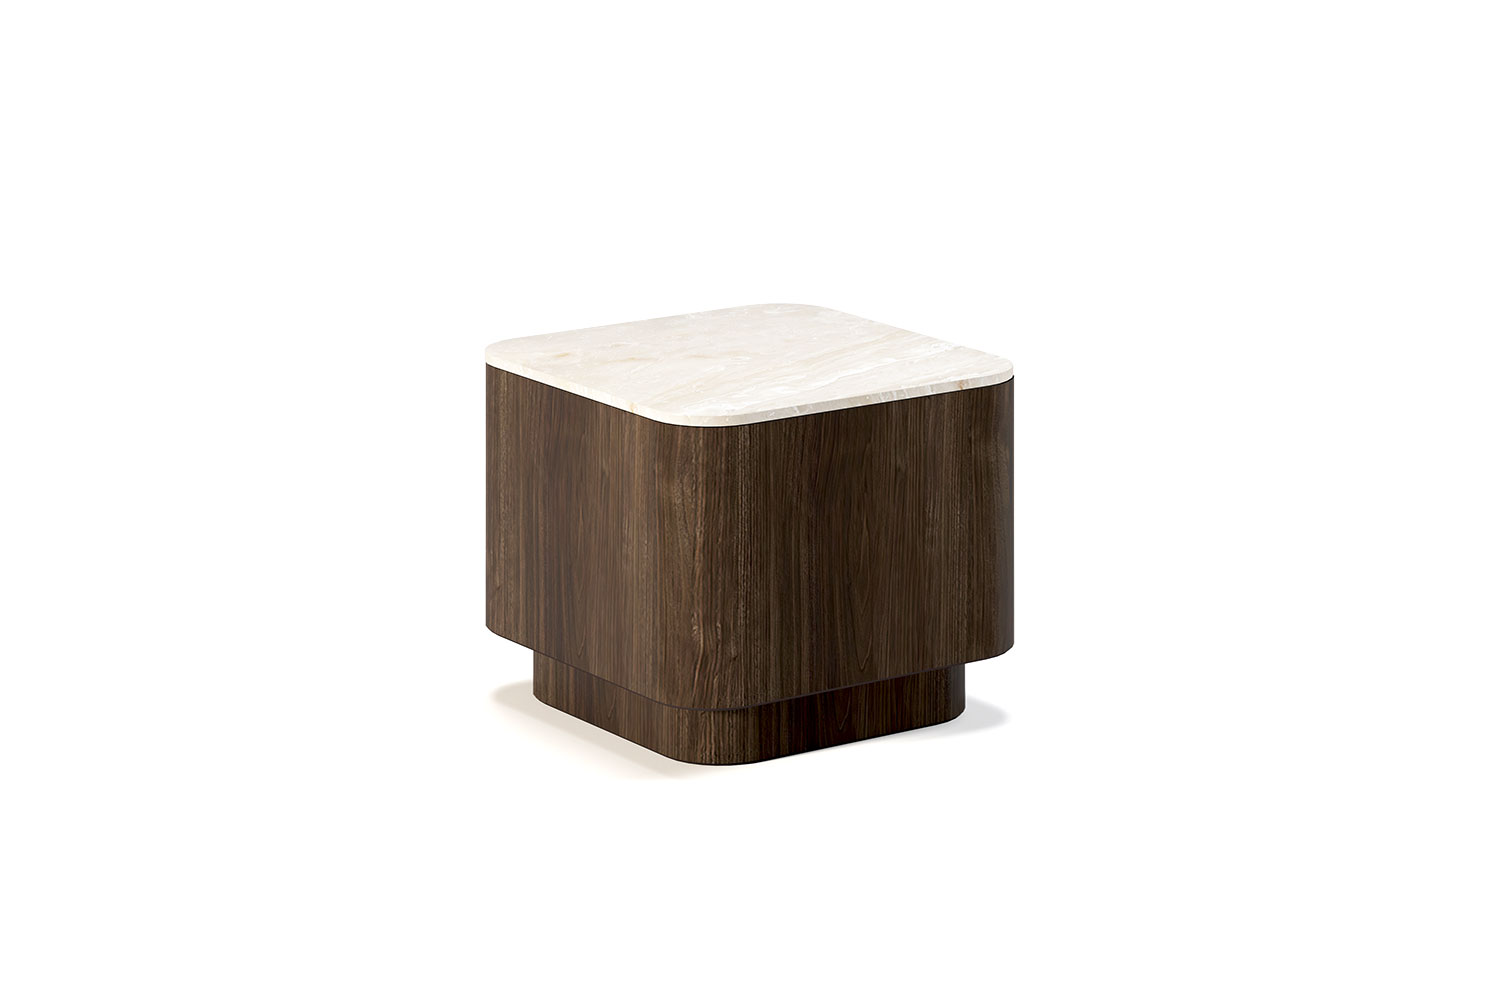 Cube Plus 18 Square Occasional Table with Inset Base